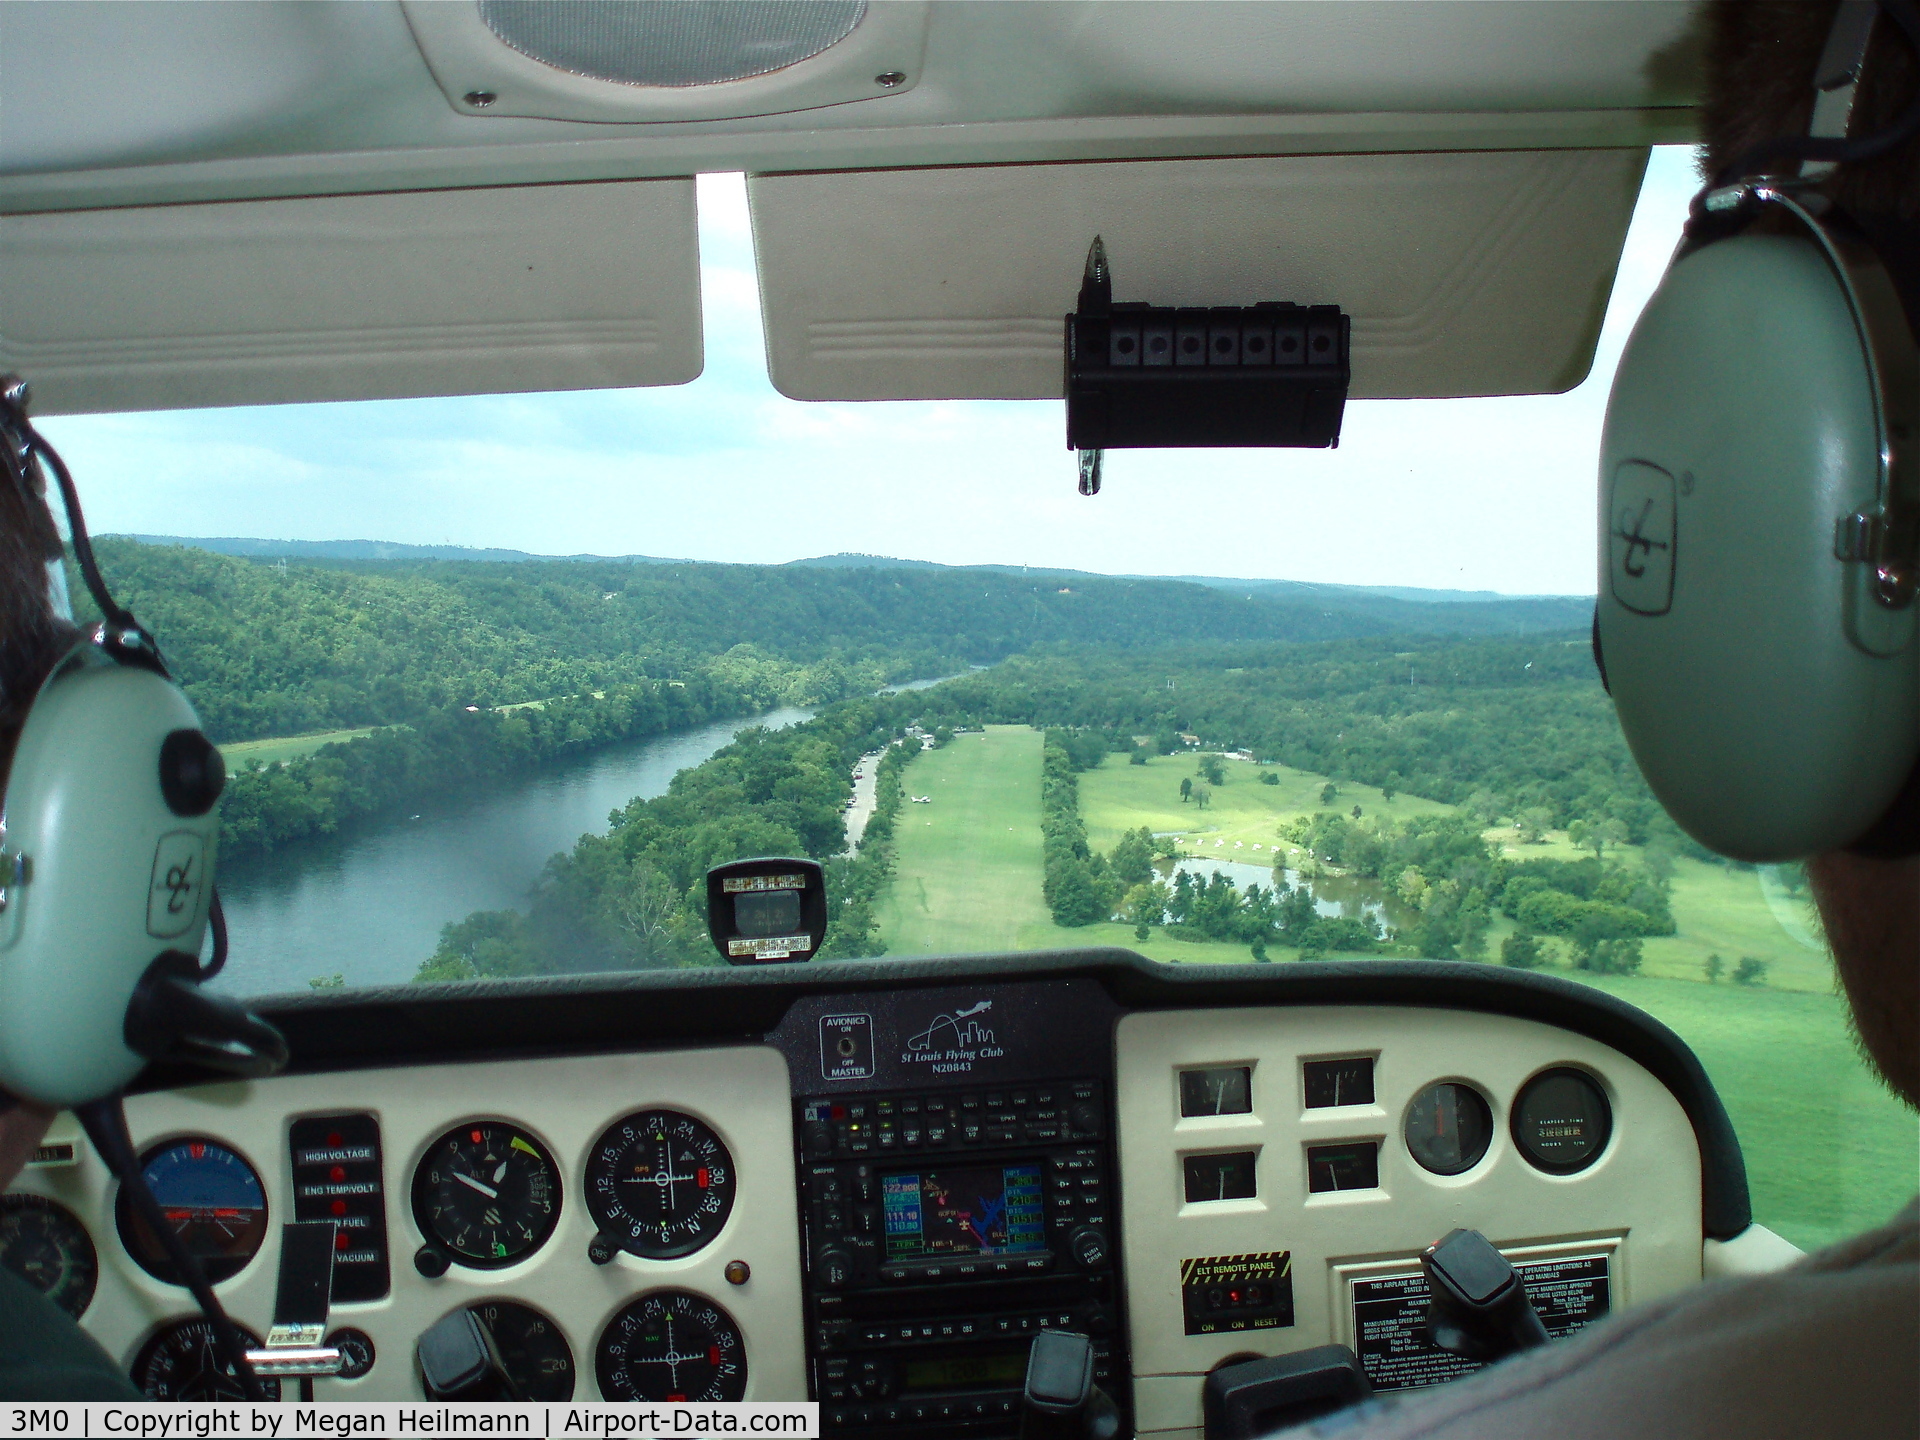 Gastons Airport (3M0) - Final approach to runway 24